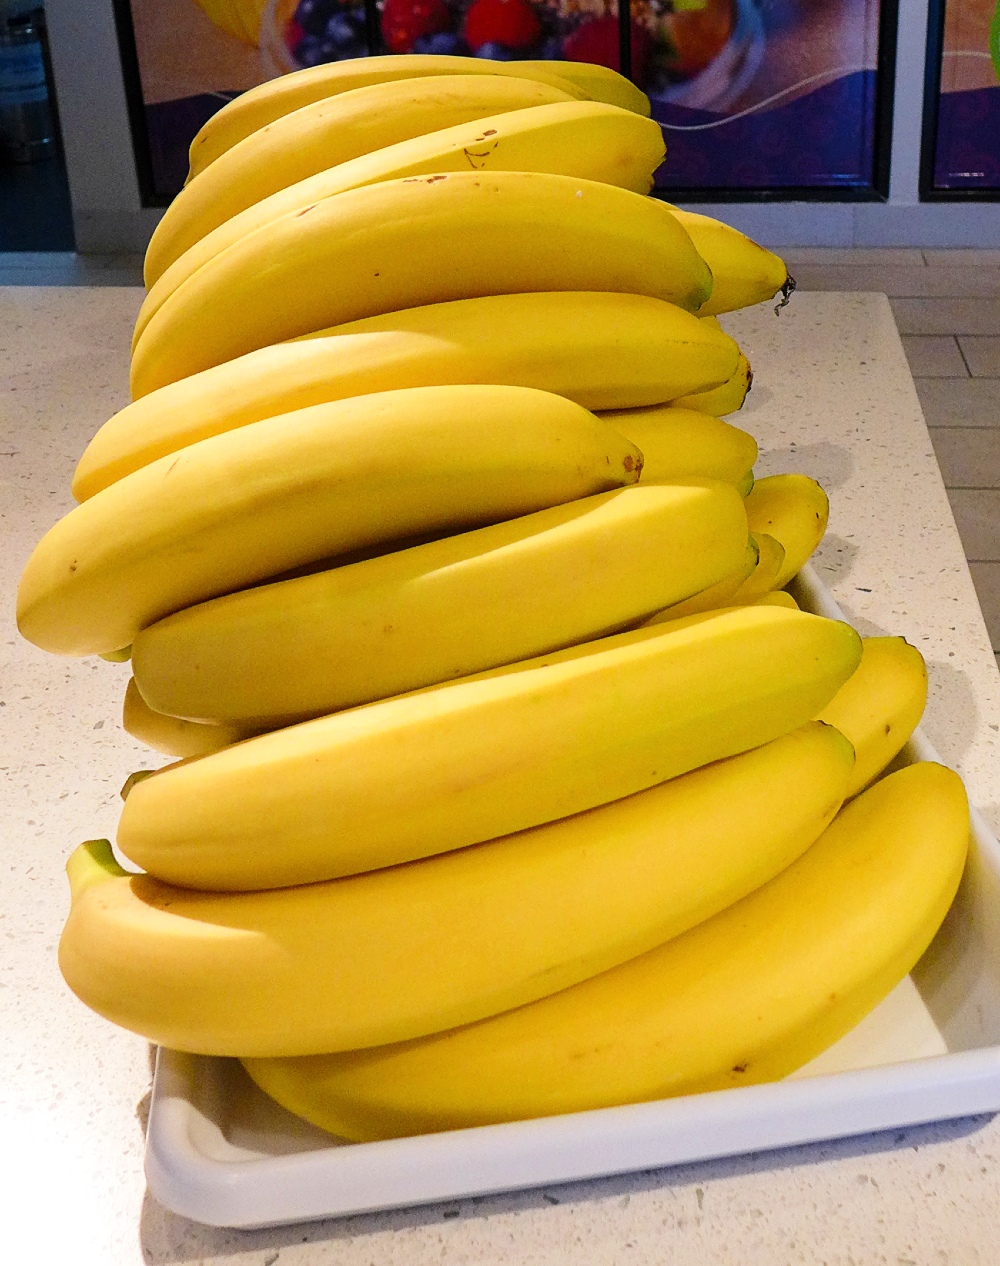 Bananas ready to be used at The Juice Bar in Norwood, Mass.